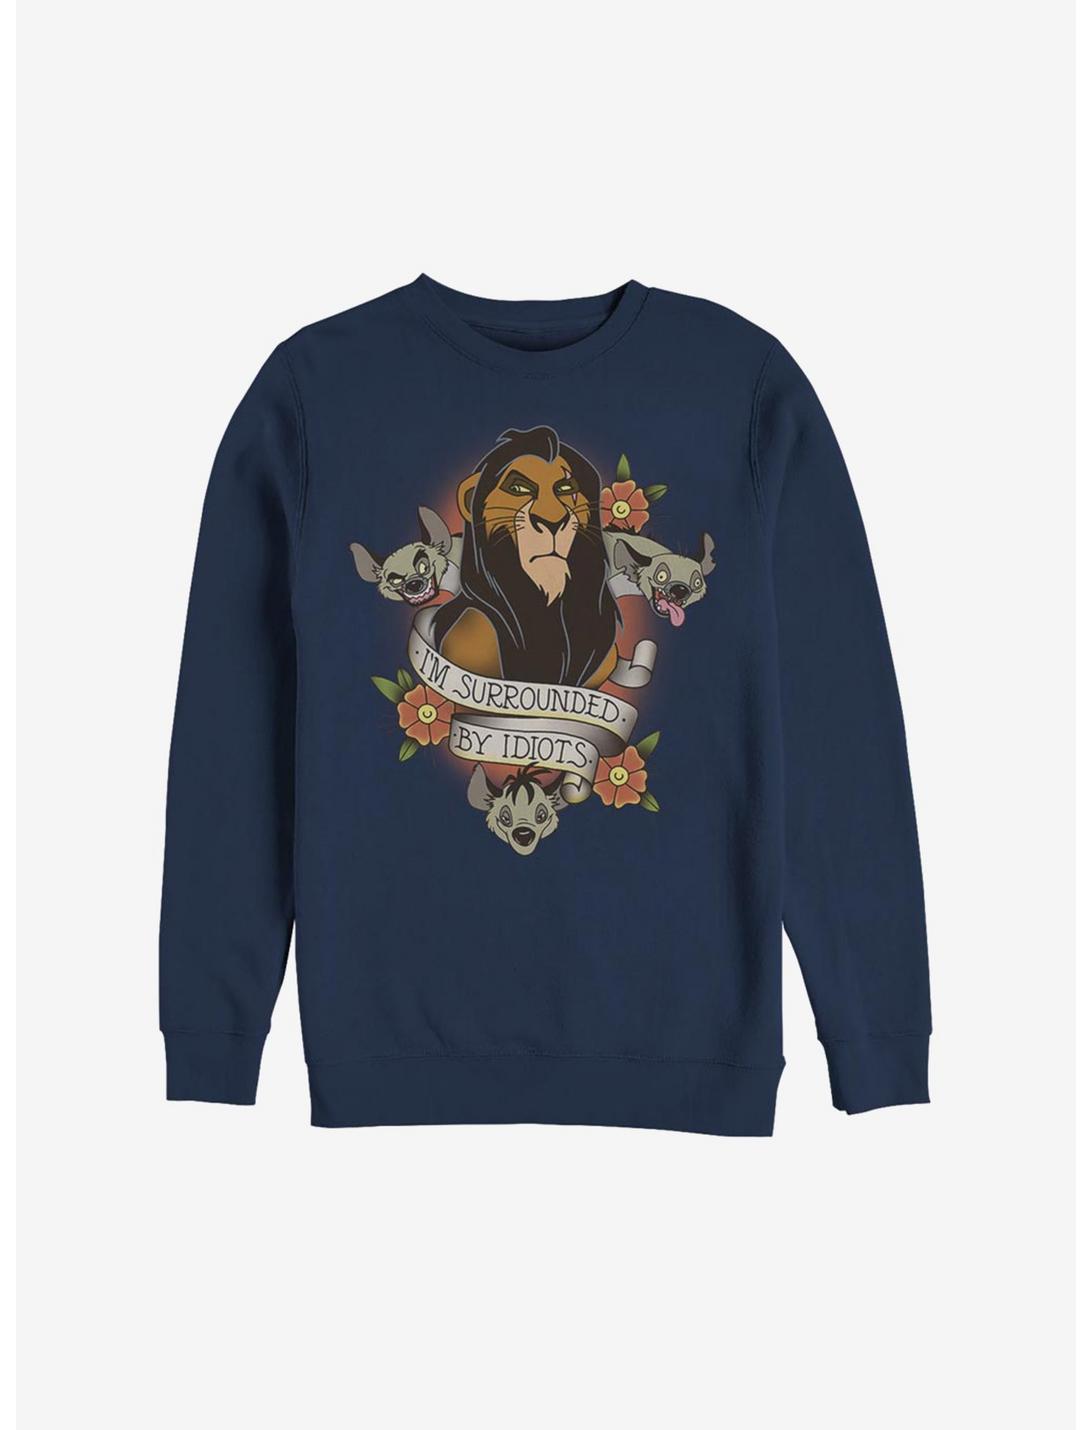 Disney The Lion King Surrounded By Idiots Sweatshirt, NAVY, hi-res